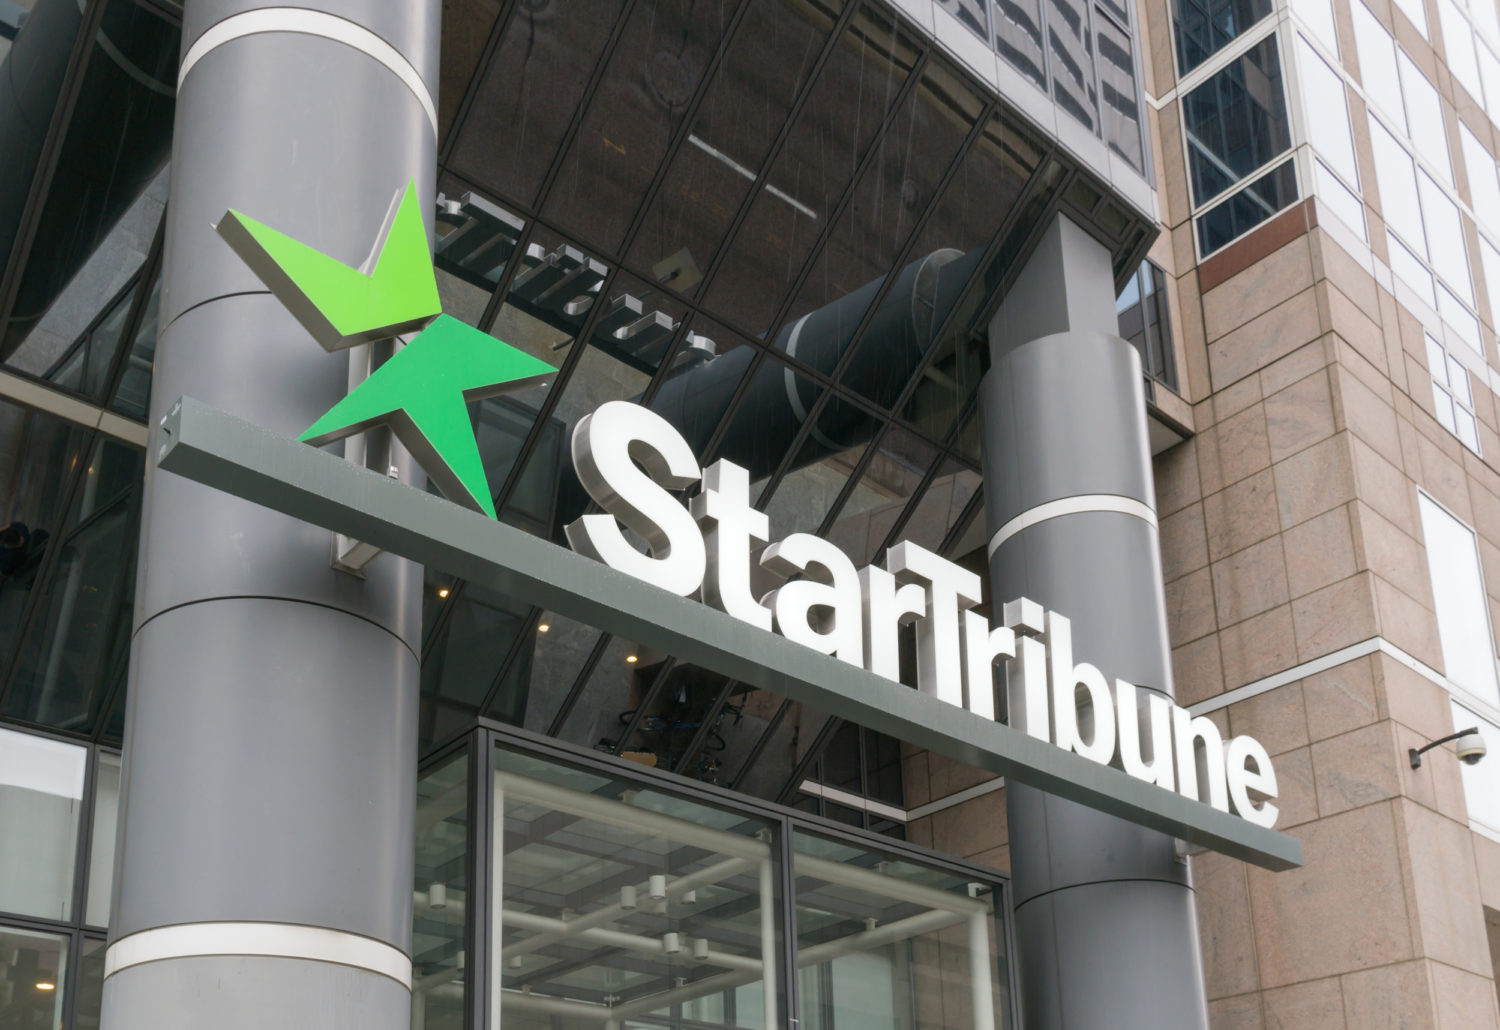 How The Minneapolis Star Tribune is driving paid digital growth while